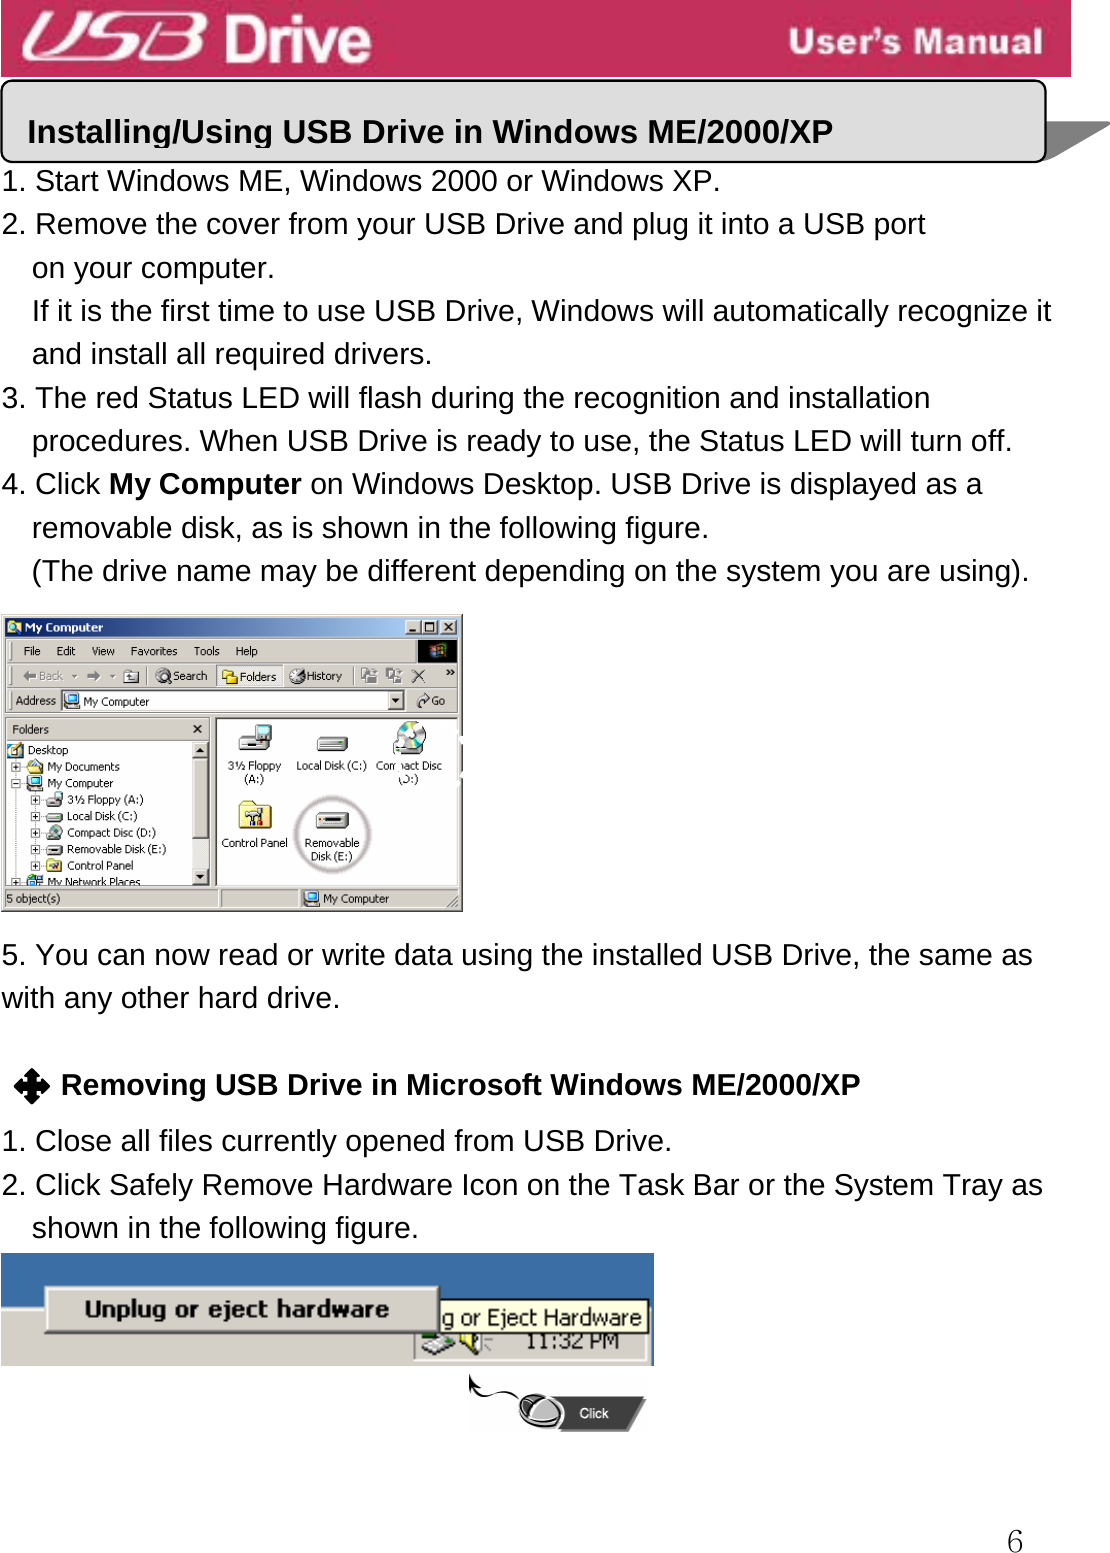  6   1. Start Windows ME, Windows 2000 or Windows XP. 2. Remove the cover from your USB Drive and plug it into a USB port   on your computer. If it is the first time to use USB Drive, Windows will automatically recognize it and install all required drivers. 3. The red Status LED will flash during the recognition and installation procedures. When USB Drive is ready to use, the Status LED will turn off. 4. Click My Computer on Windows Desktop. USB Drive is displayed as a removable disk, as is shown in the following figure.   (The drive name may be different depending on the system you are using).    5. You can now read or write data using the installed USB Drive, the same as with any other hard drive.  Removing USB Drive in Microsoft Windows ME/2000/XP  1. Close all files currently opened from USB Drive. 2. Click Safely Remove Hardware Icon on the Task Bar or the System Tray as   shown in the following figure.  Installing/Using USB Drive in Windows ME/2000/XP 